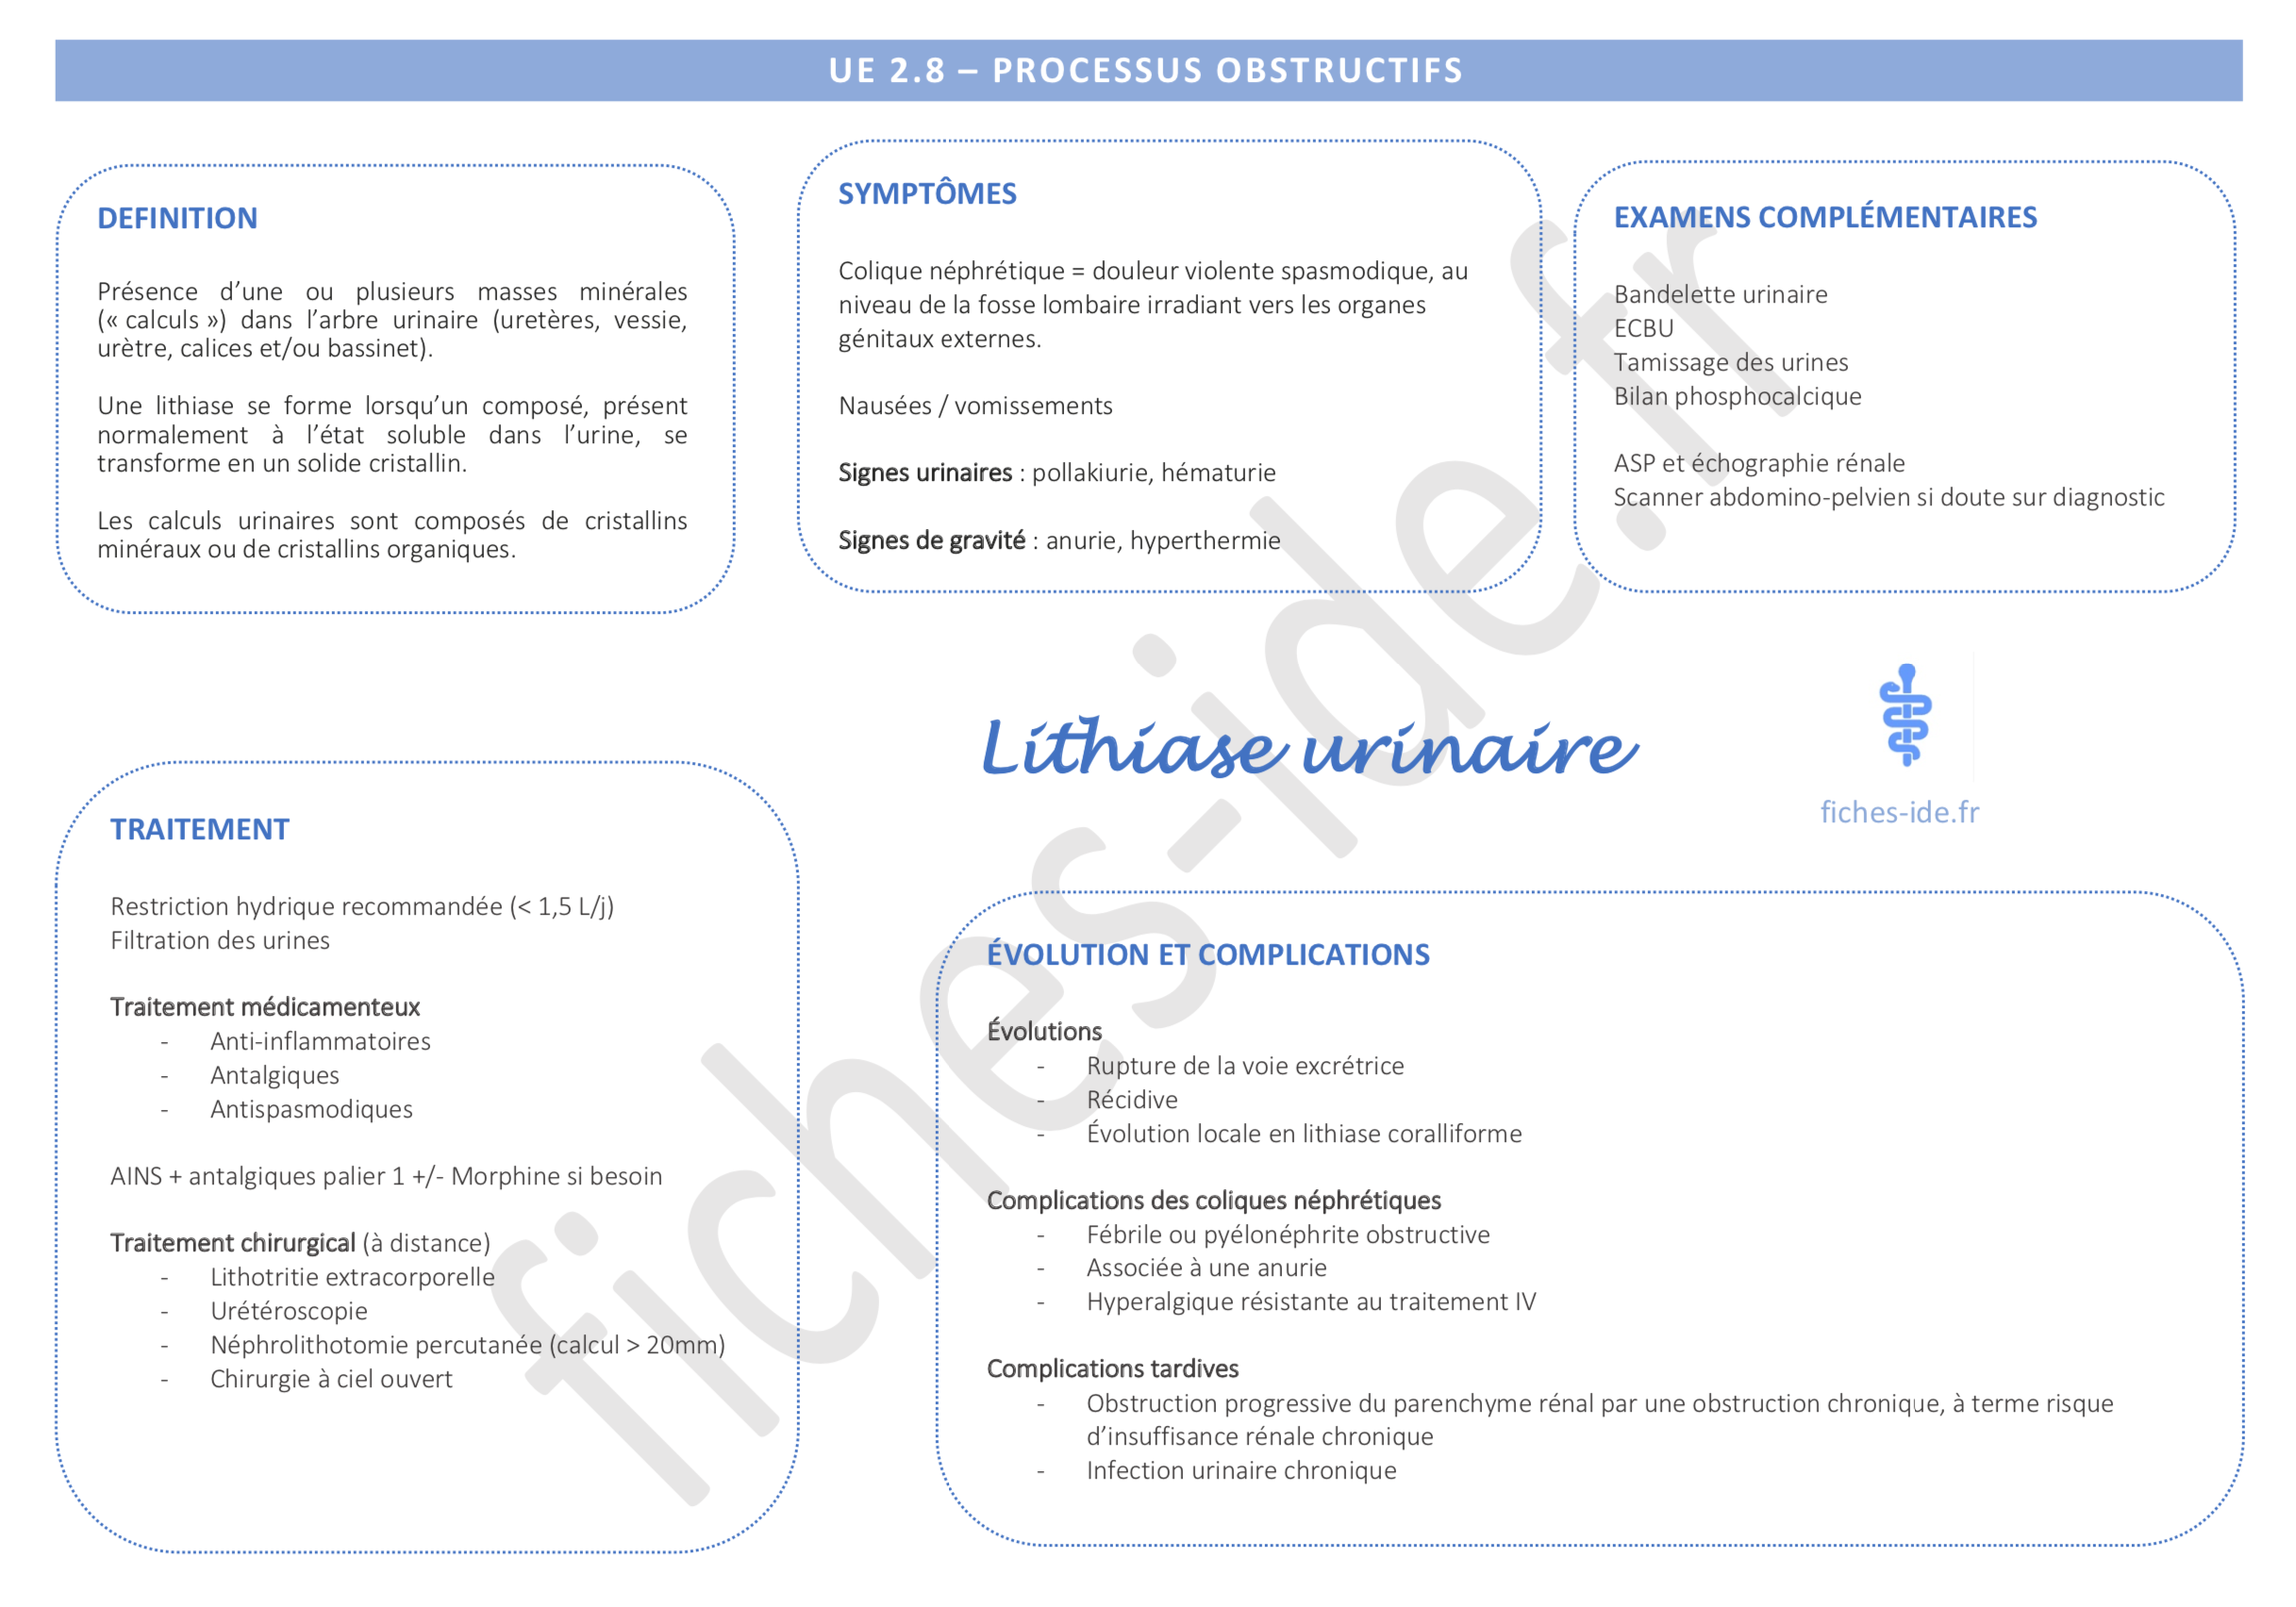 Lithiase urinaire / UE 2.8 Processus obstructifs - Cours IFSI